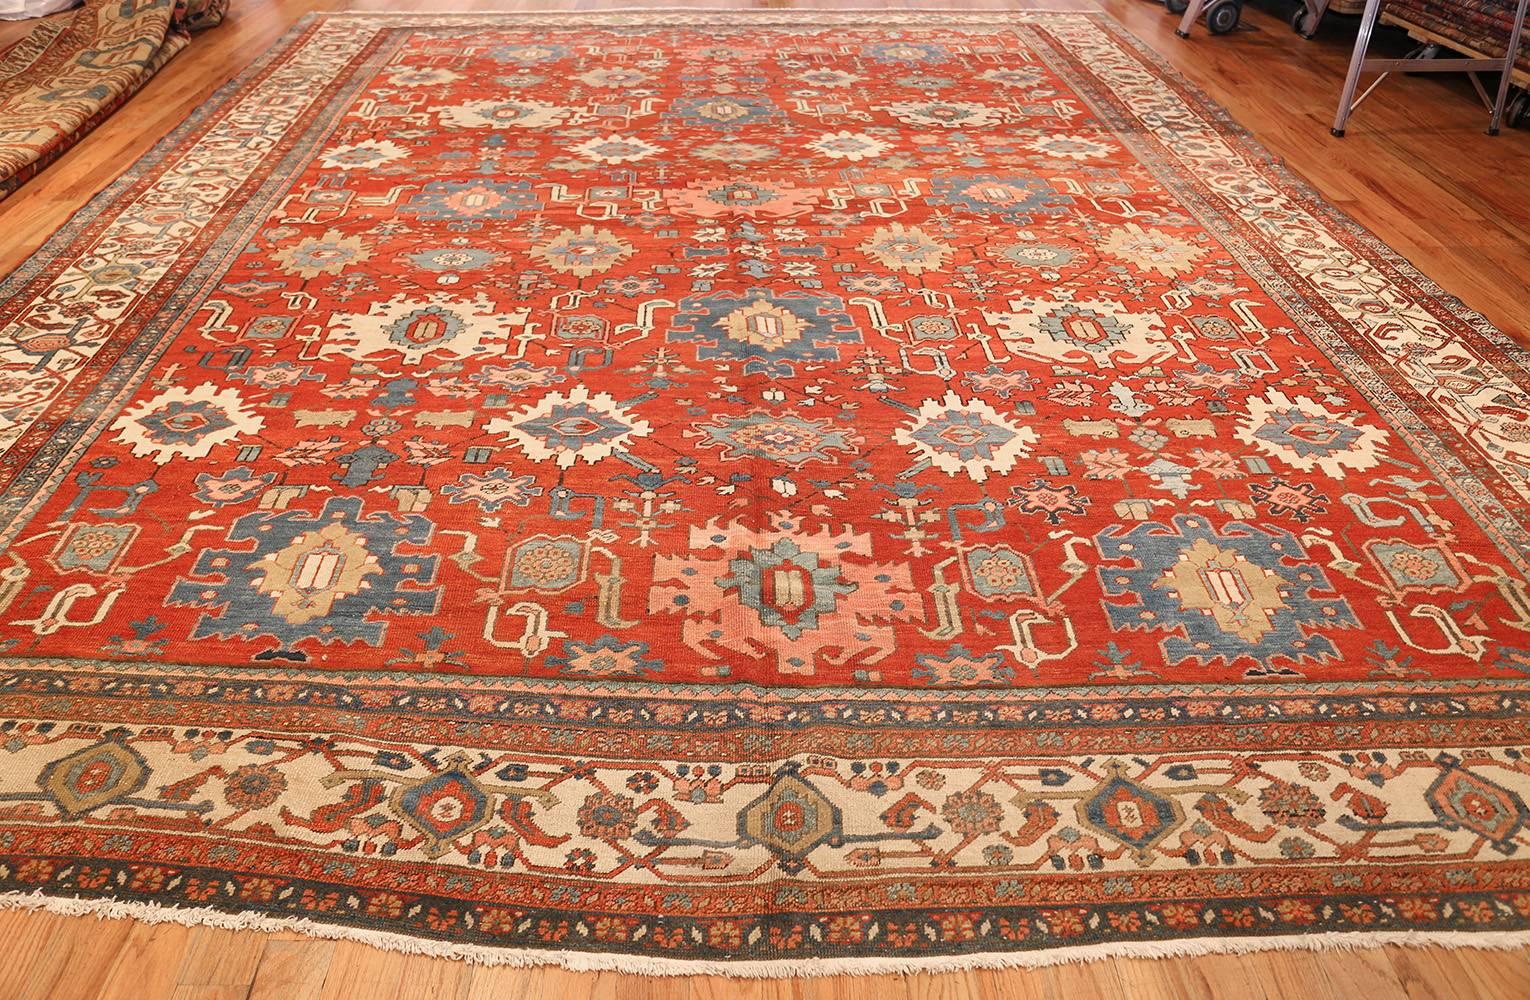 Beautiful red background antique red room size Persian Bakshaish rug, country of origin / rug type: Persian rug, circa date: 1880 – true to the traditional style of many beautiful antique Persian Bakshaish rugs, this masterpiece showcases angular